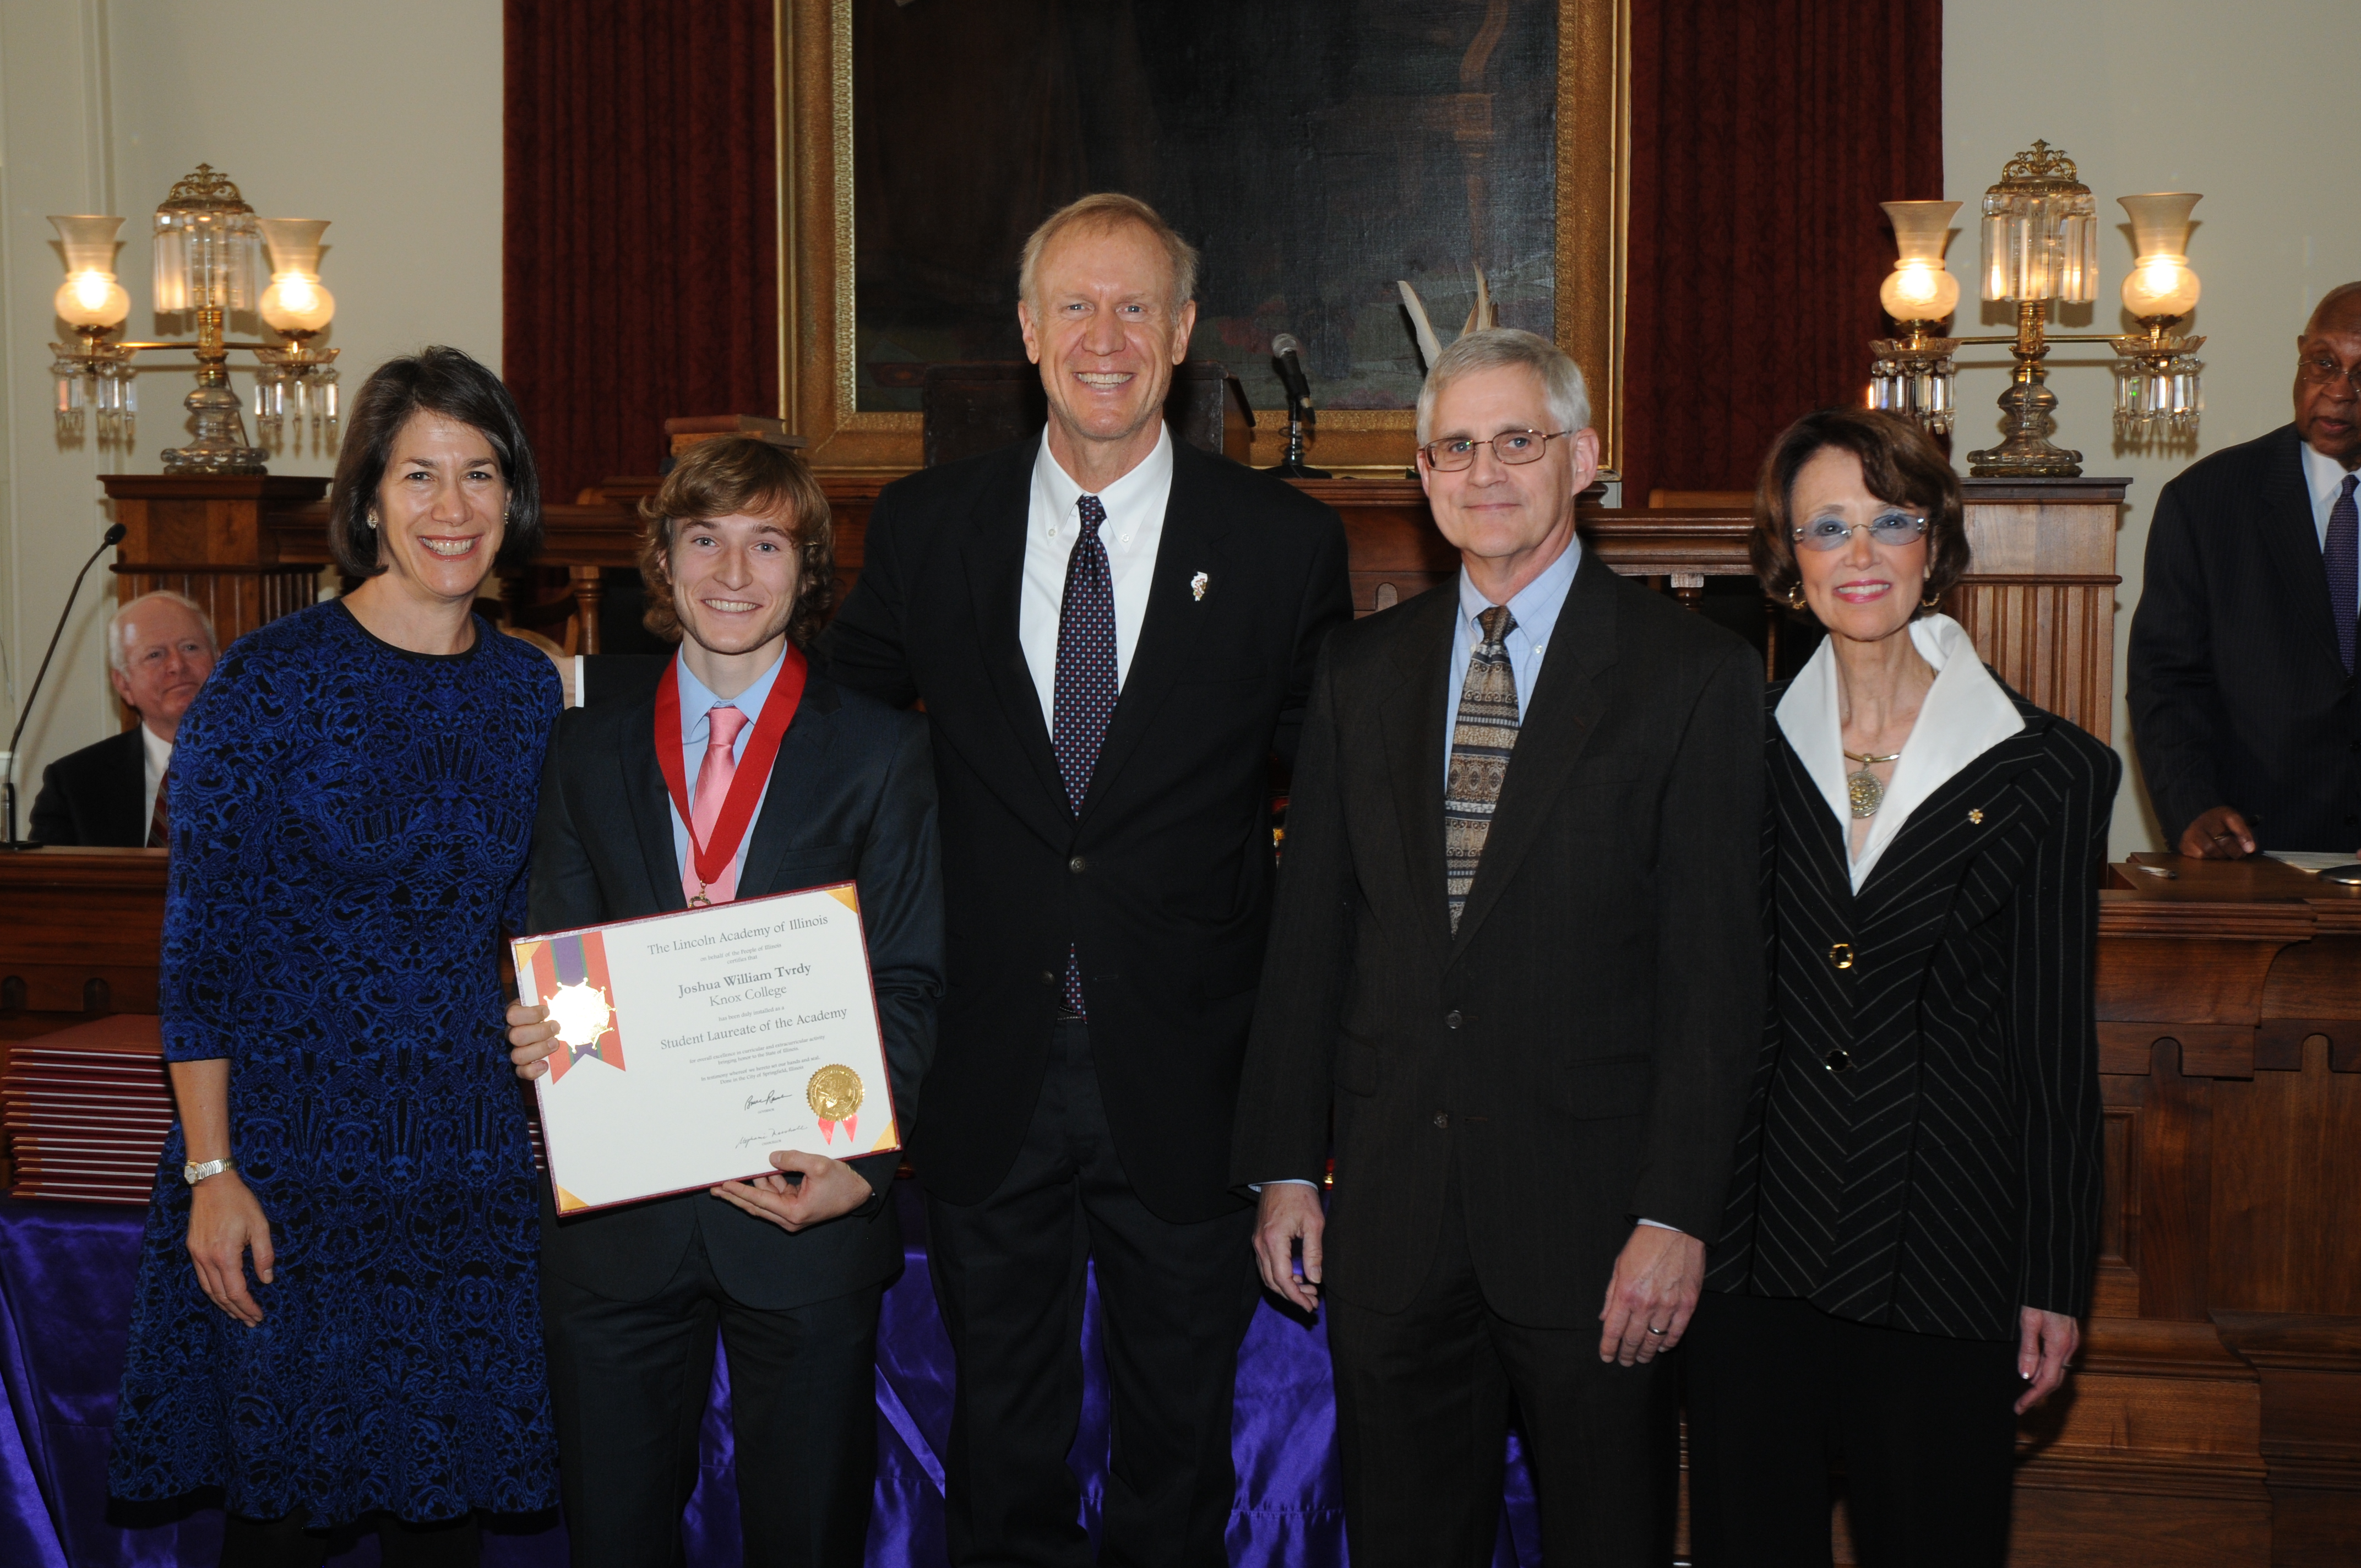 Josh Tvrdy '17 was honored as a Lincoln Laureate